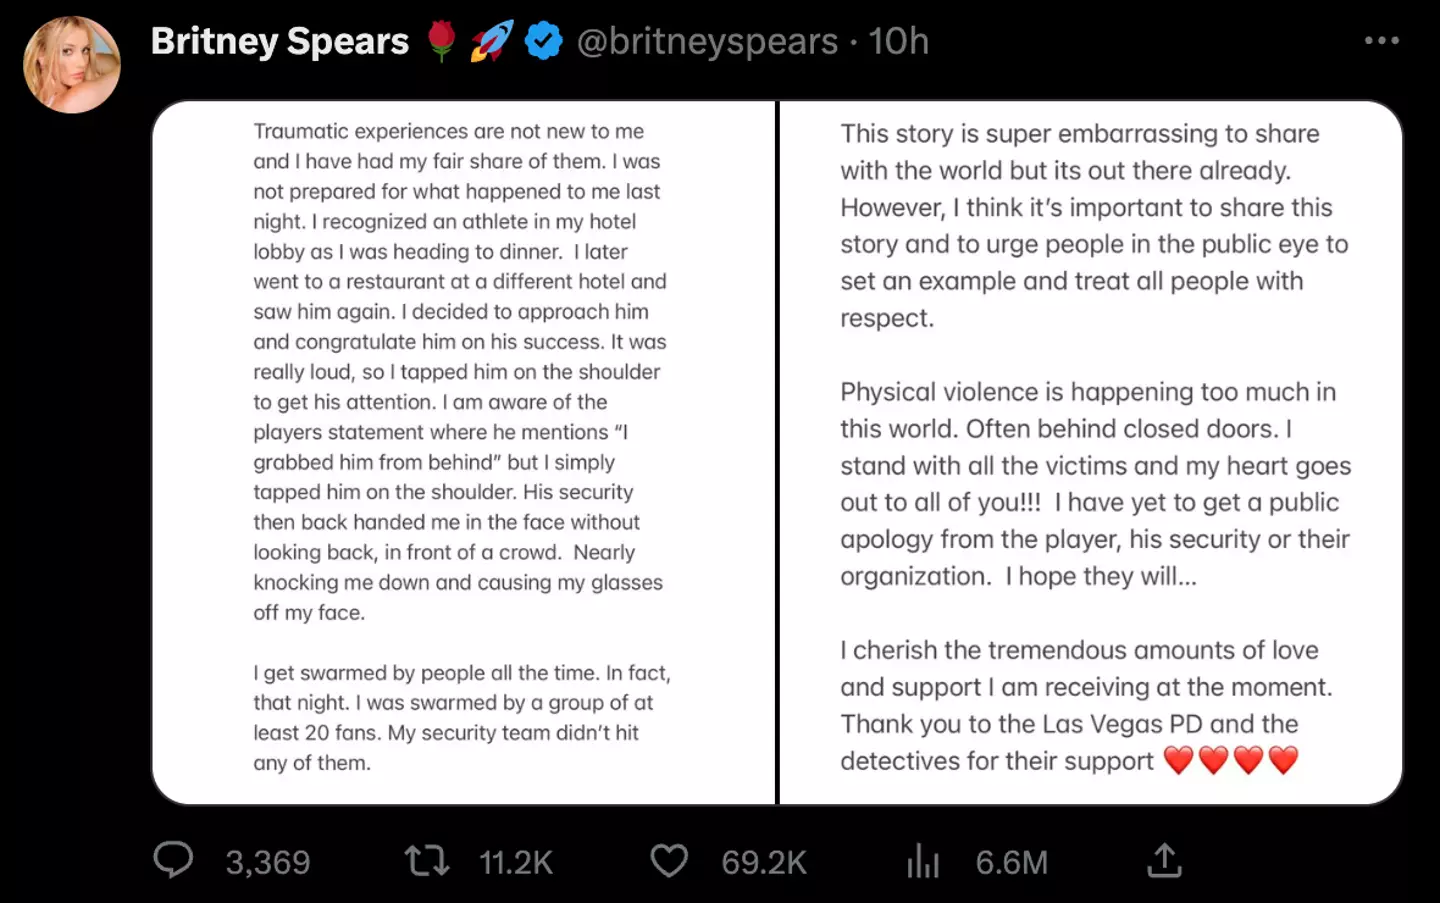 Spears responded to the NBA's star's account of the incident with a statement posted to Twitter.